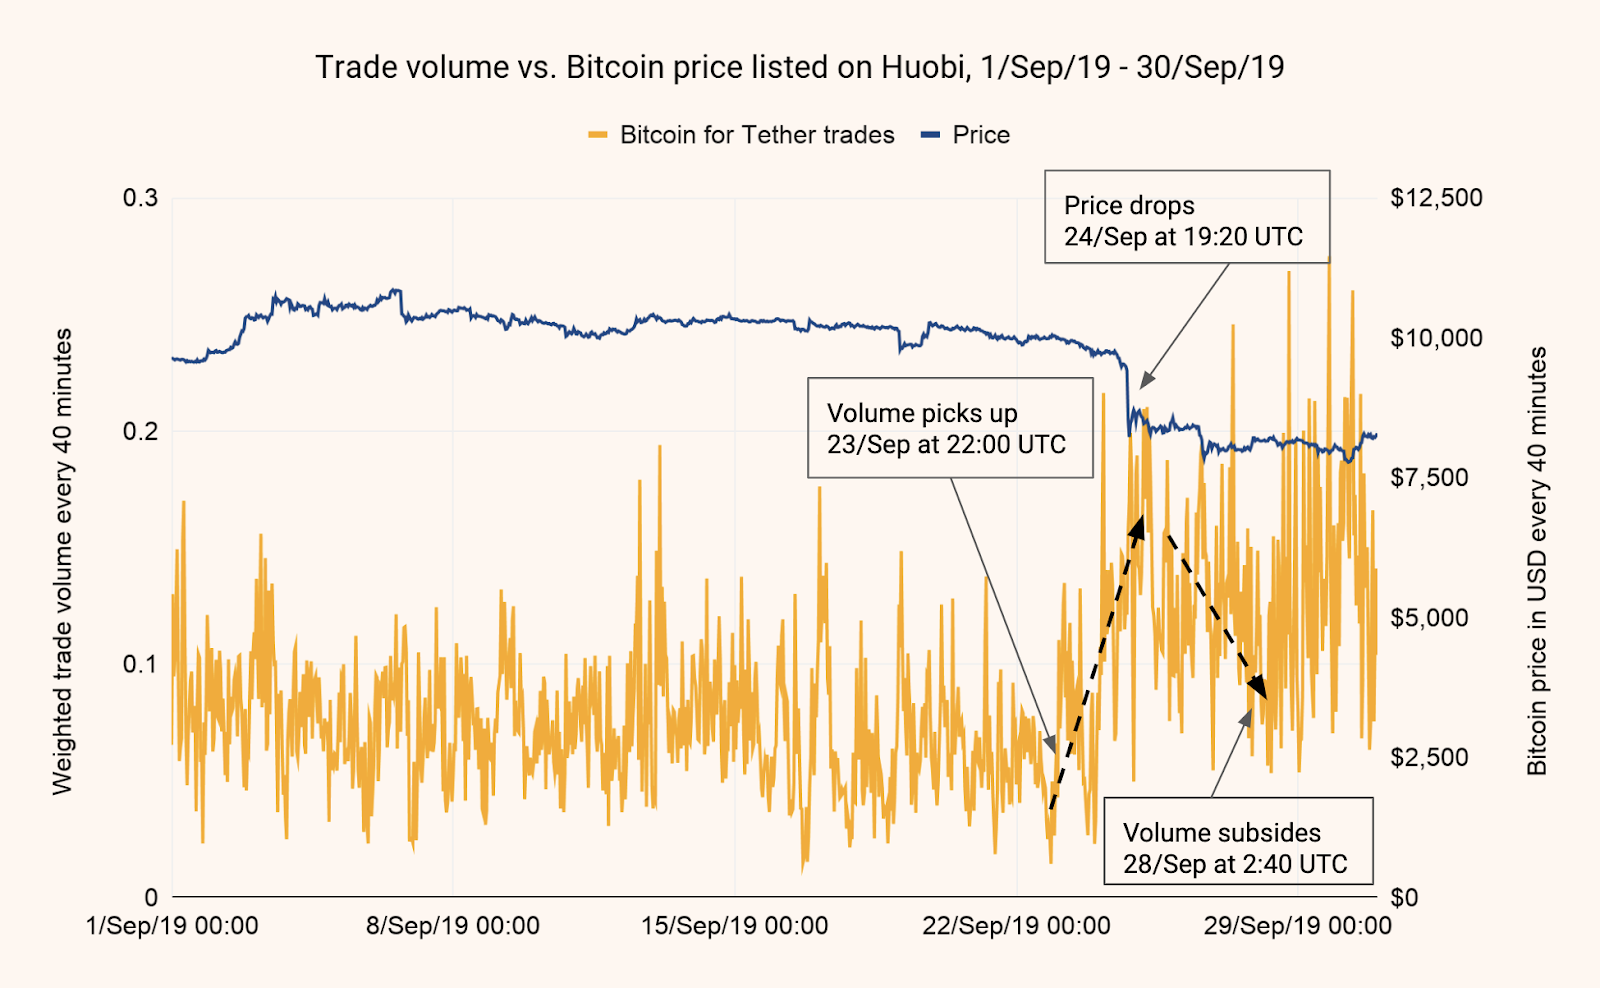 Chainalysis has traced the PlusToken team’s attempts to sell ill-gotten bitcoin through Huobi OTC desks, potentially influencing the BTC price.